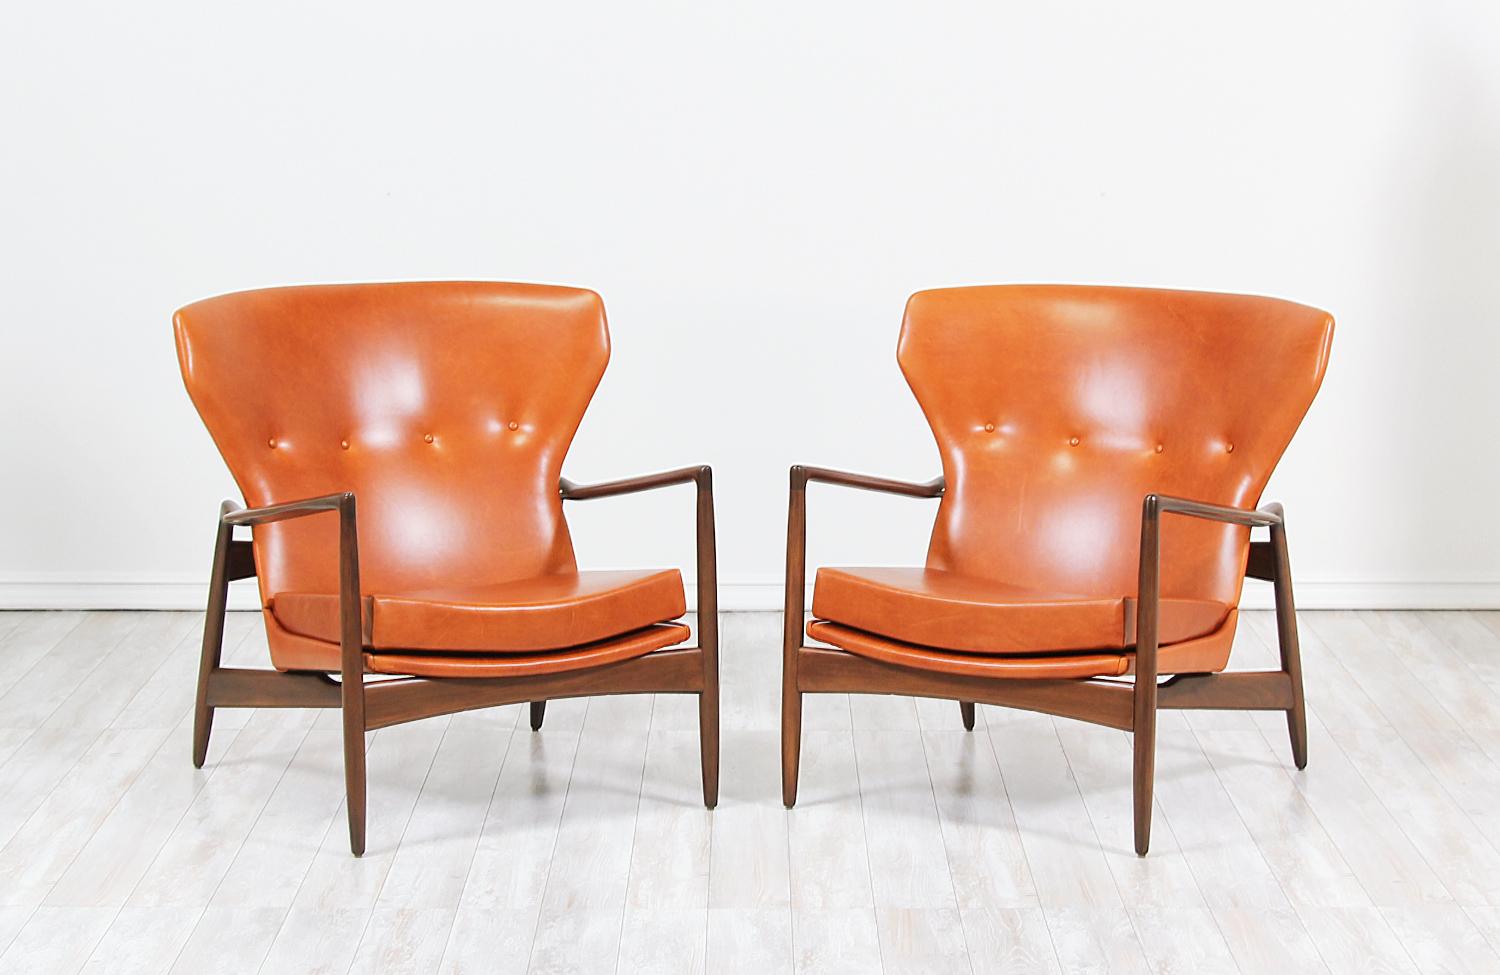 Pair of stylish lounge chairs designed by Ib Kofod-Larsen for Selig in Denmark, circa 1960s. These bold wingback style chairs feature a sculptural walnut-stained beechwood frame that holds the seat with a high-back and lower armrests emphasizing its